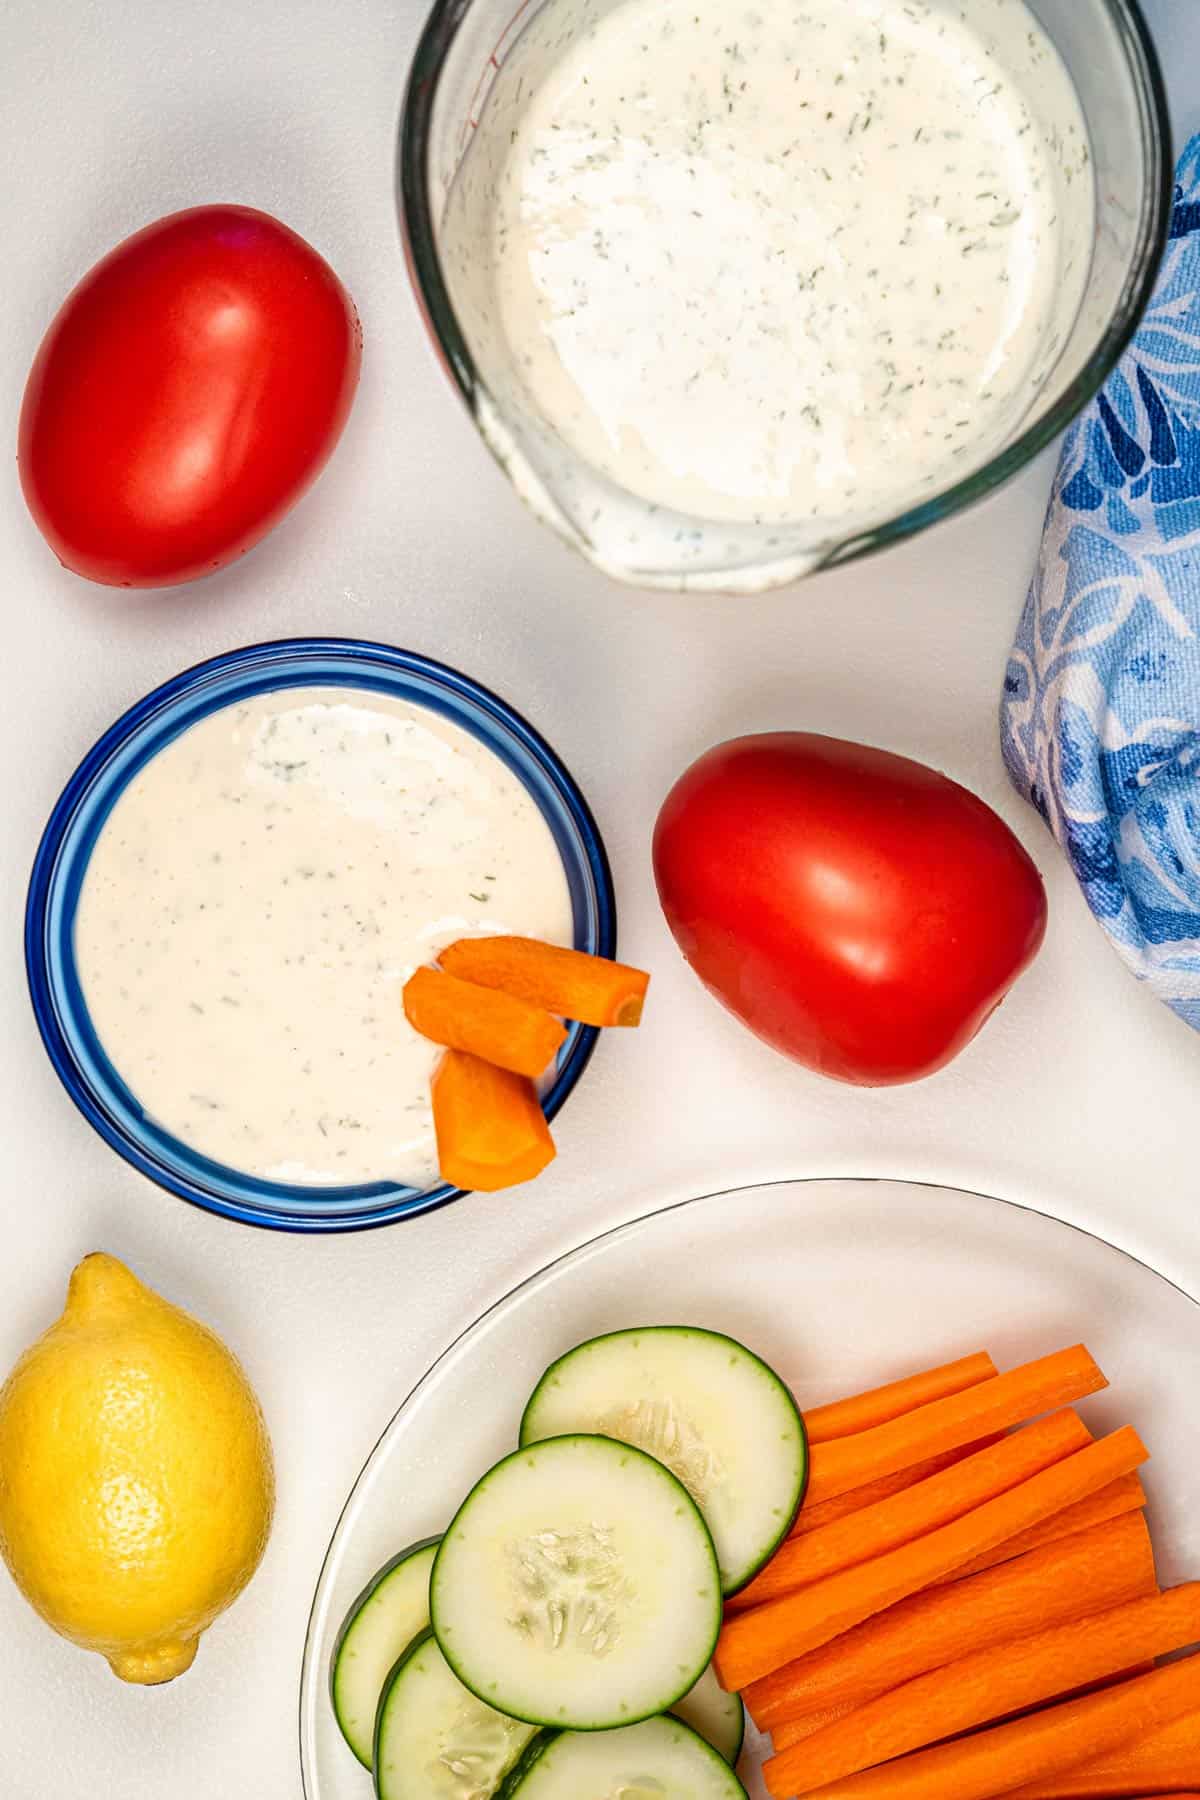 Dish of vegan ranch dressing with carrot sticks in it with other vegetables surrounding the dish like tomatoes, a lemon, and some cucumber slices.